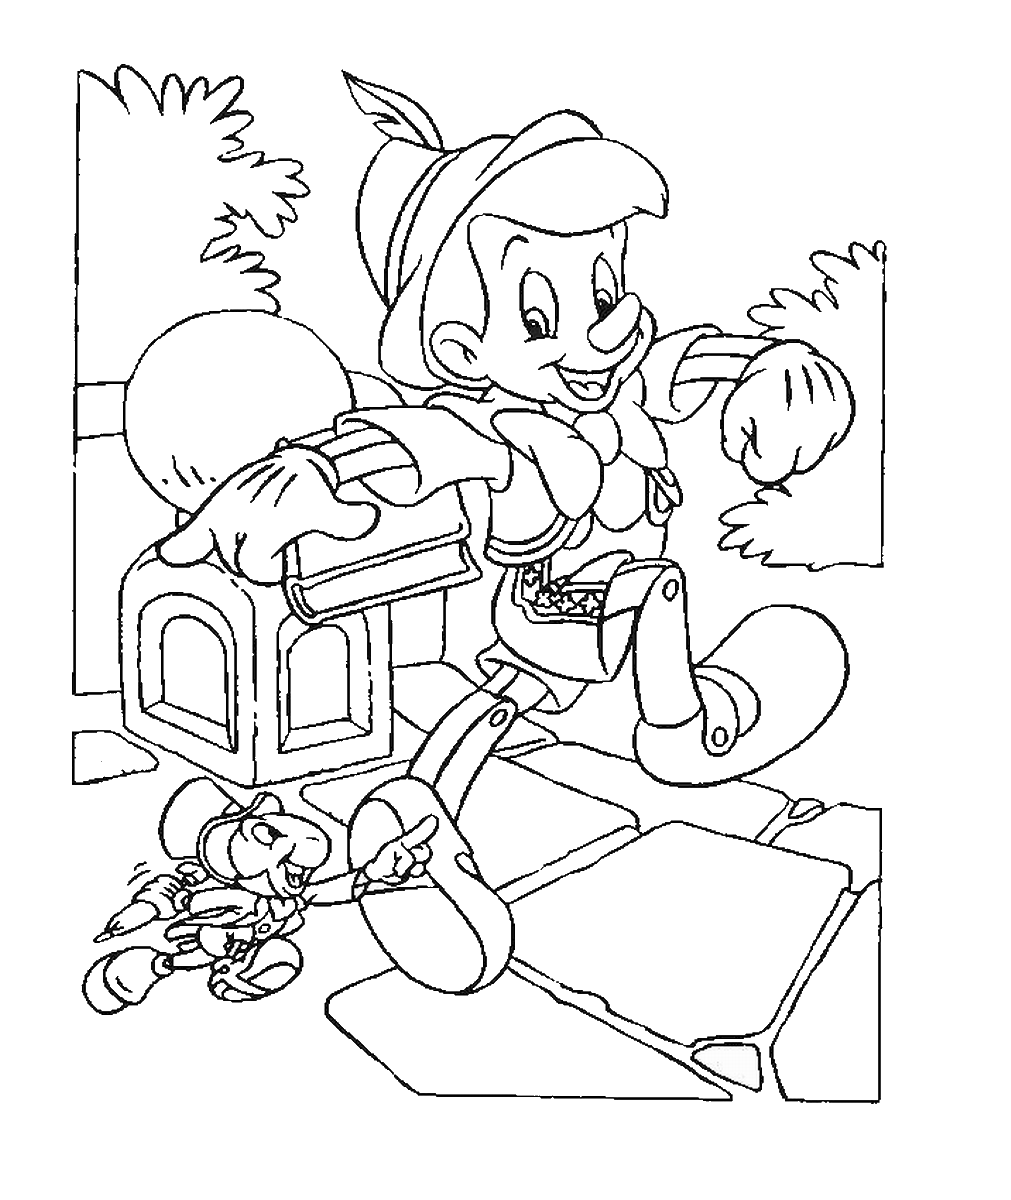 Pinocchio Coloring Pages TV Film Pinocchio_coloring_10 Printable 2020 06327 Coloring4free